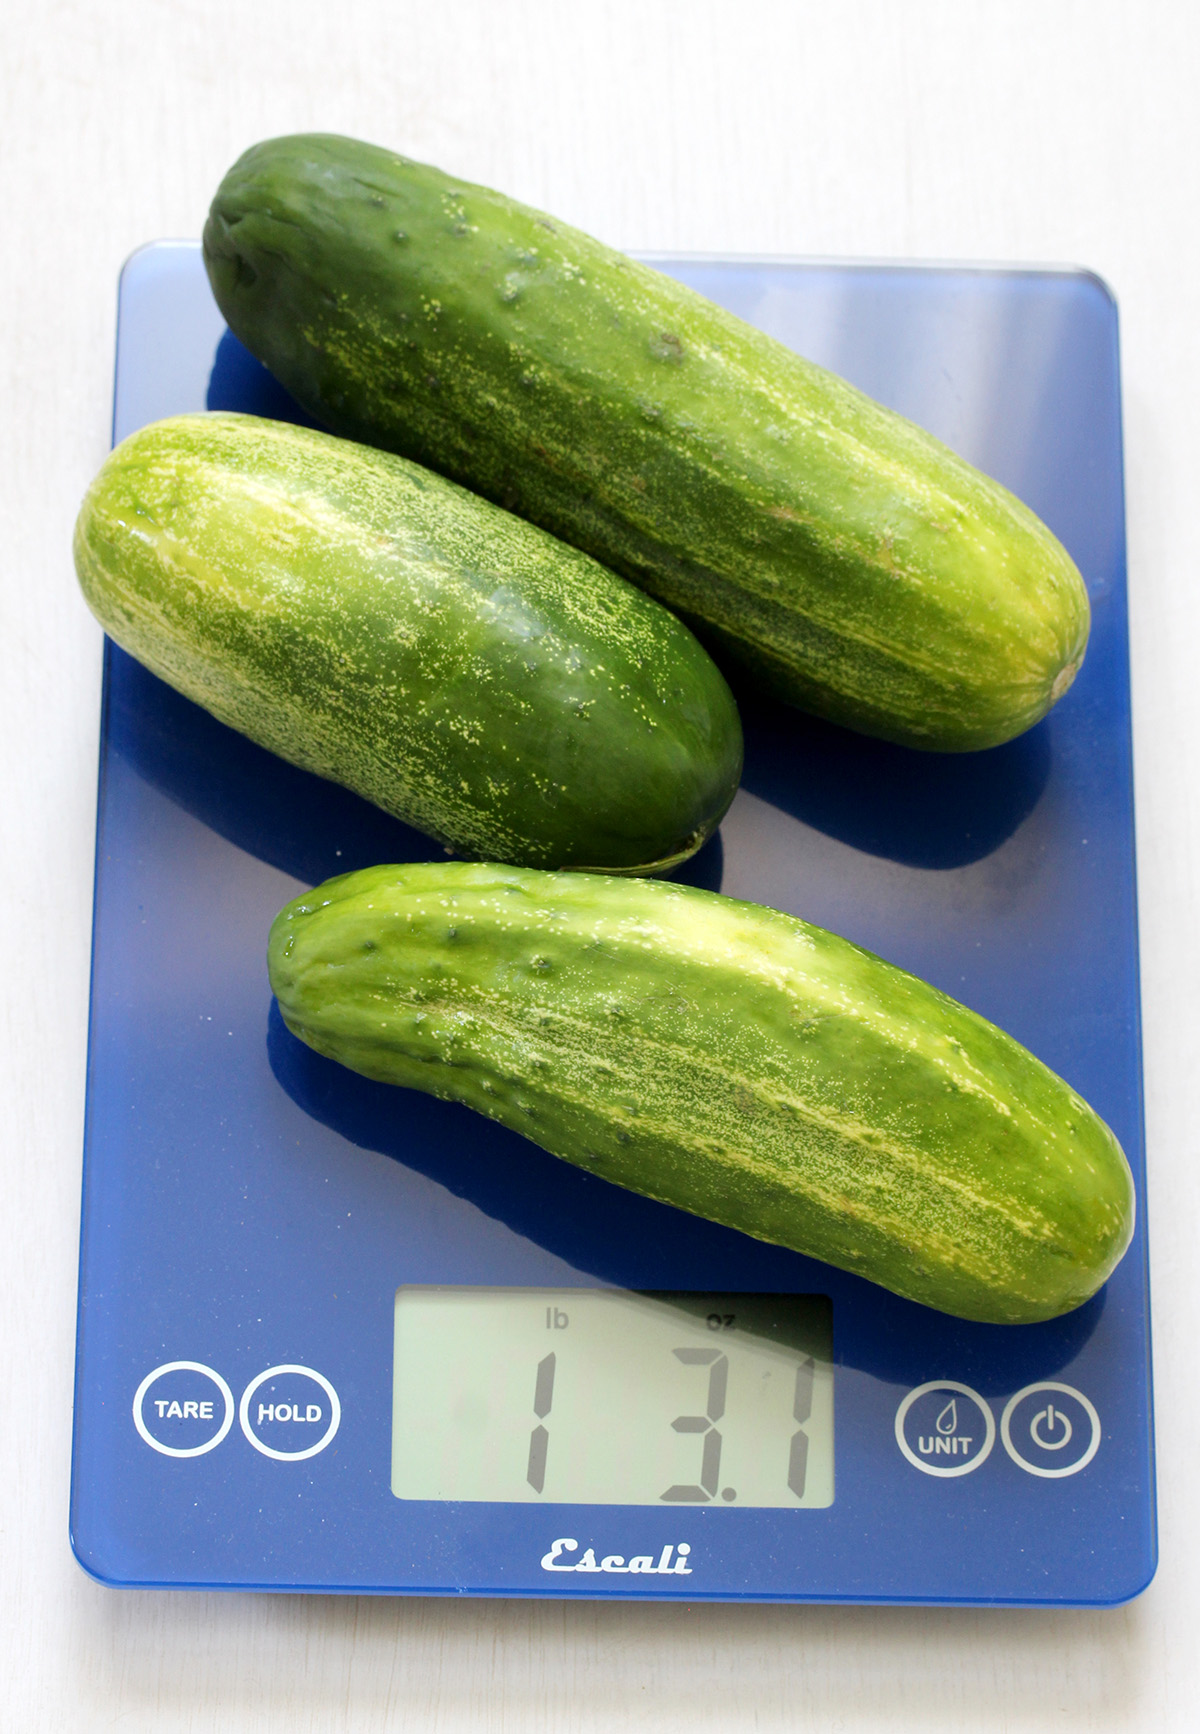 Kirby cucumbers for making low sodium dill pickles